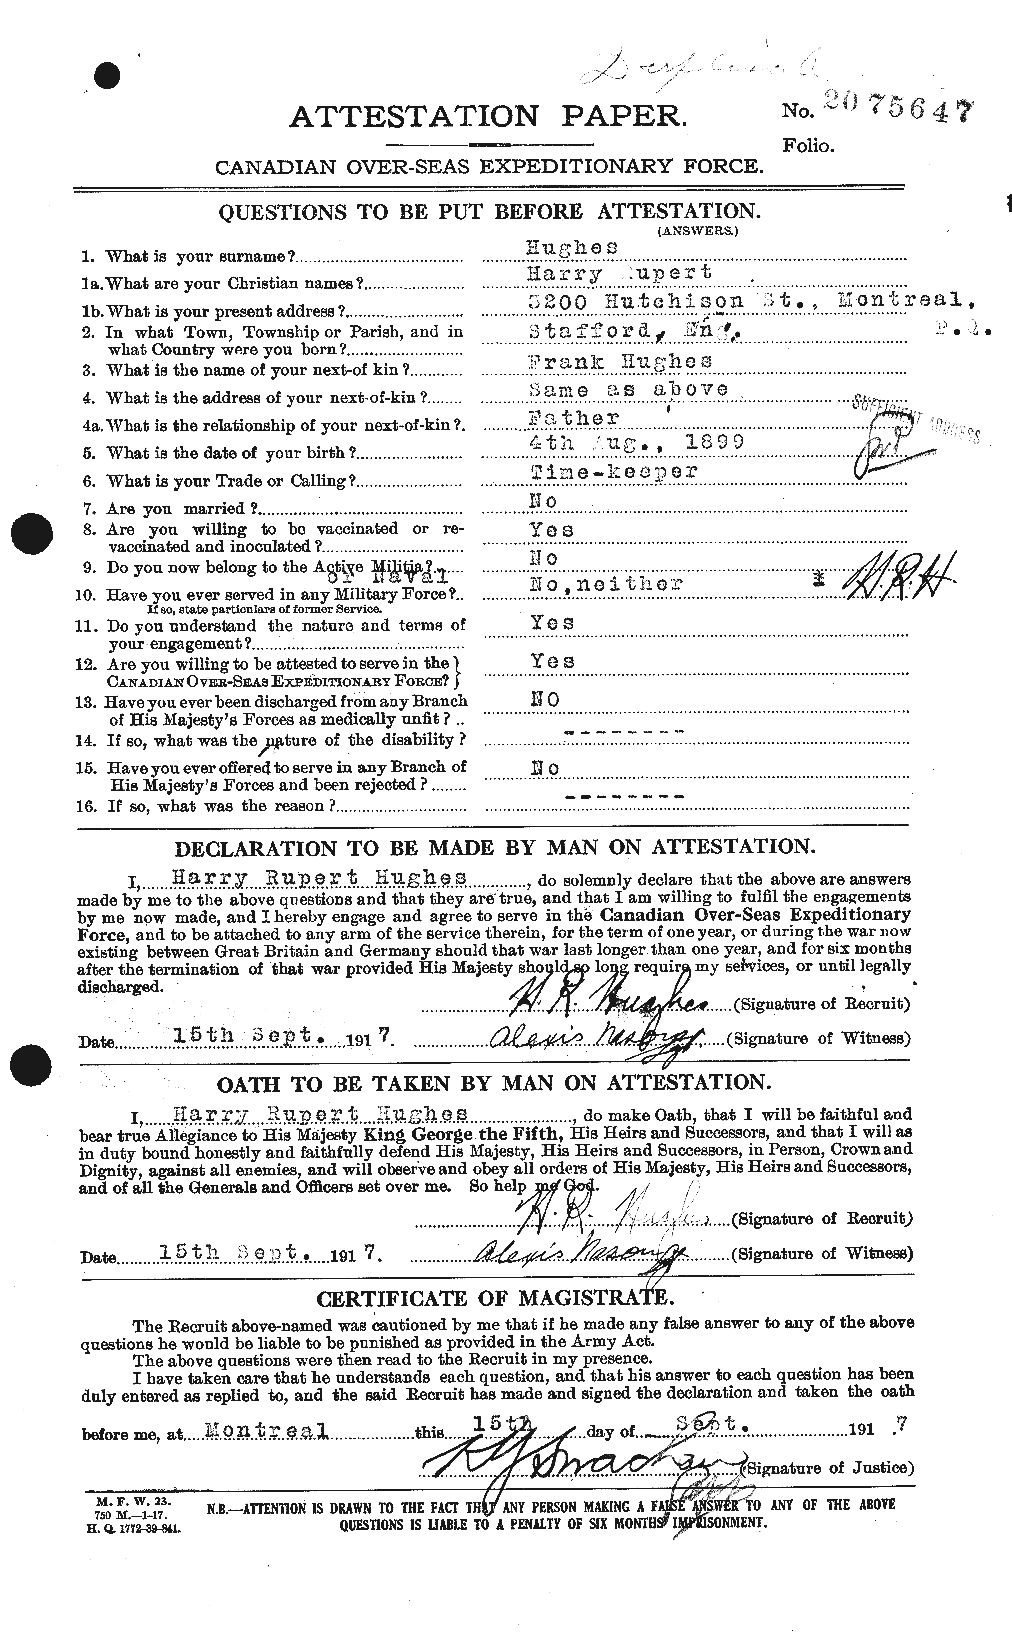 Personnel Records of the First World War - CEF 403875a